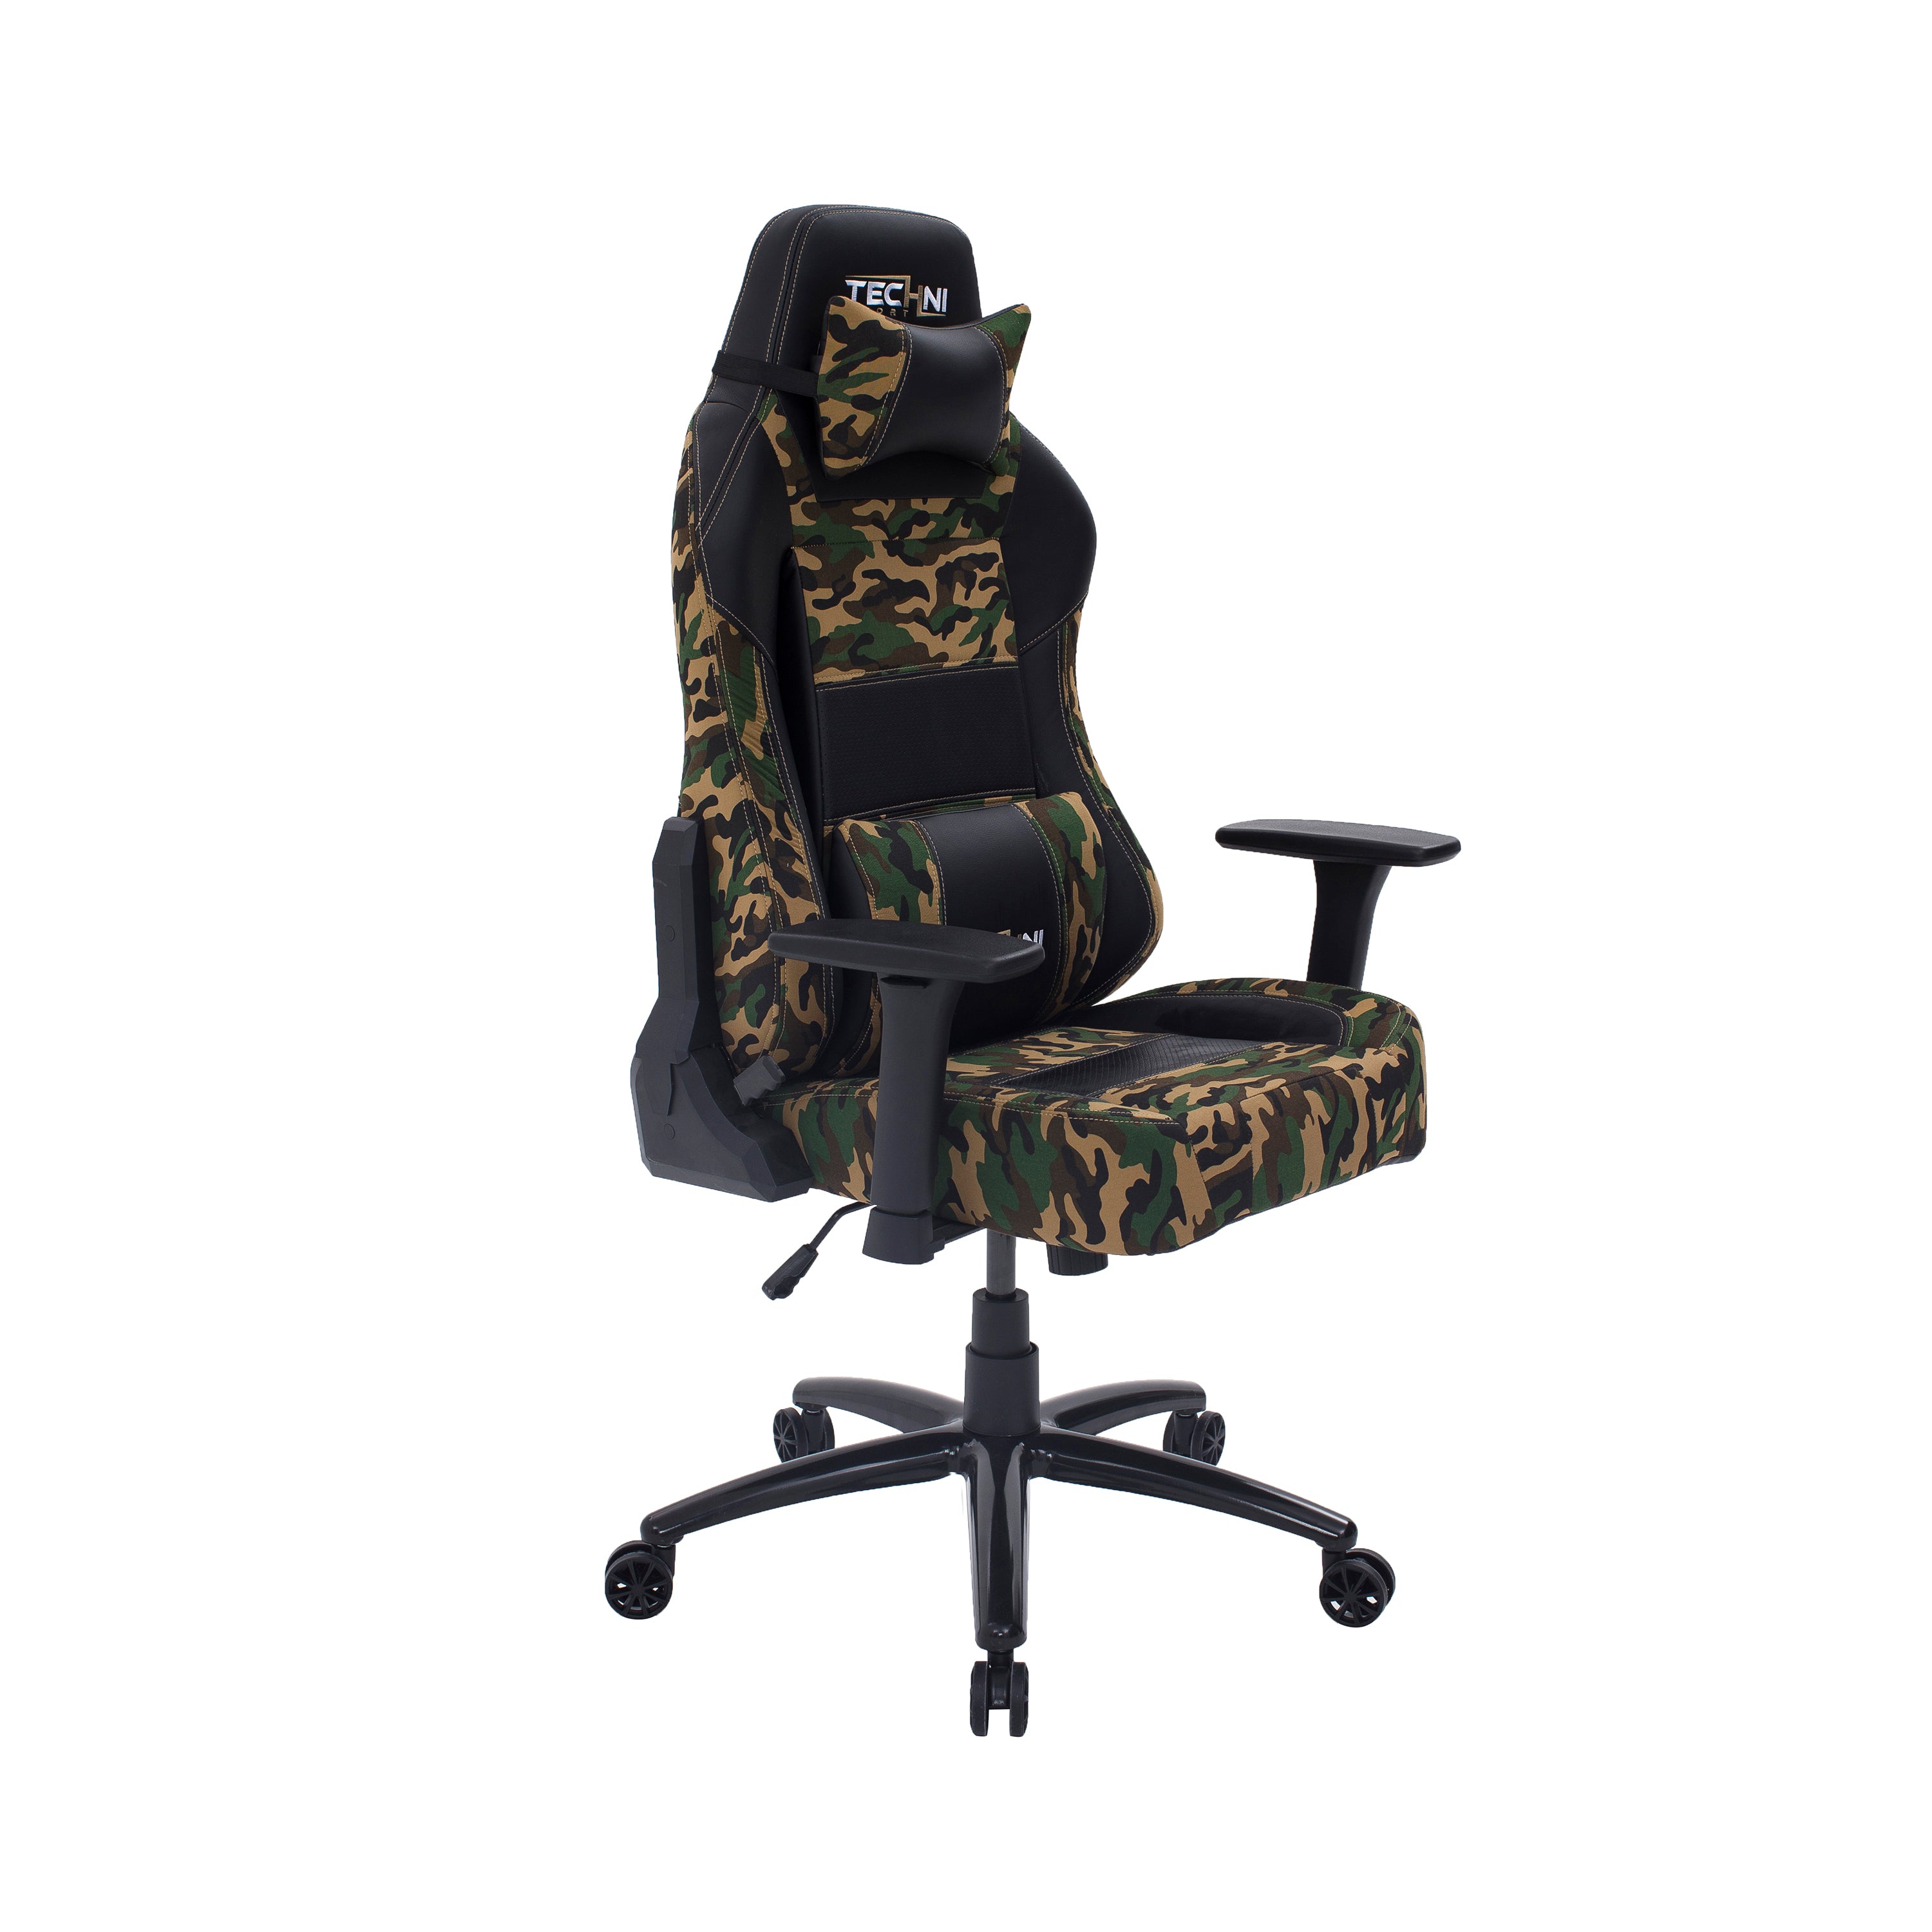 Techni Sport Ts 60 Camouflage Racer Style Video Gaming Chair